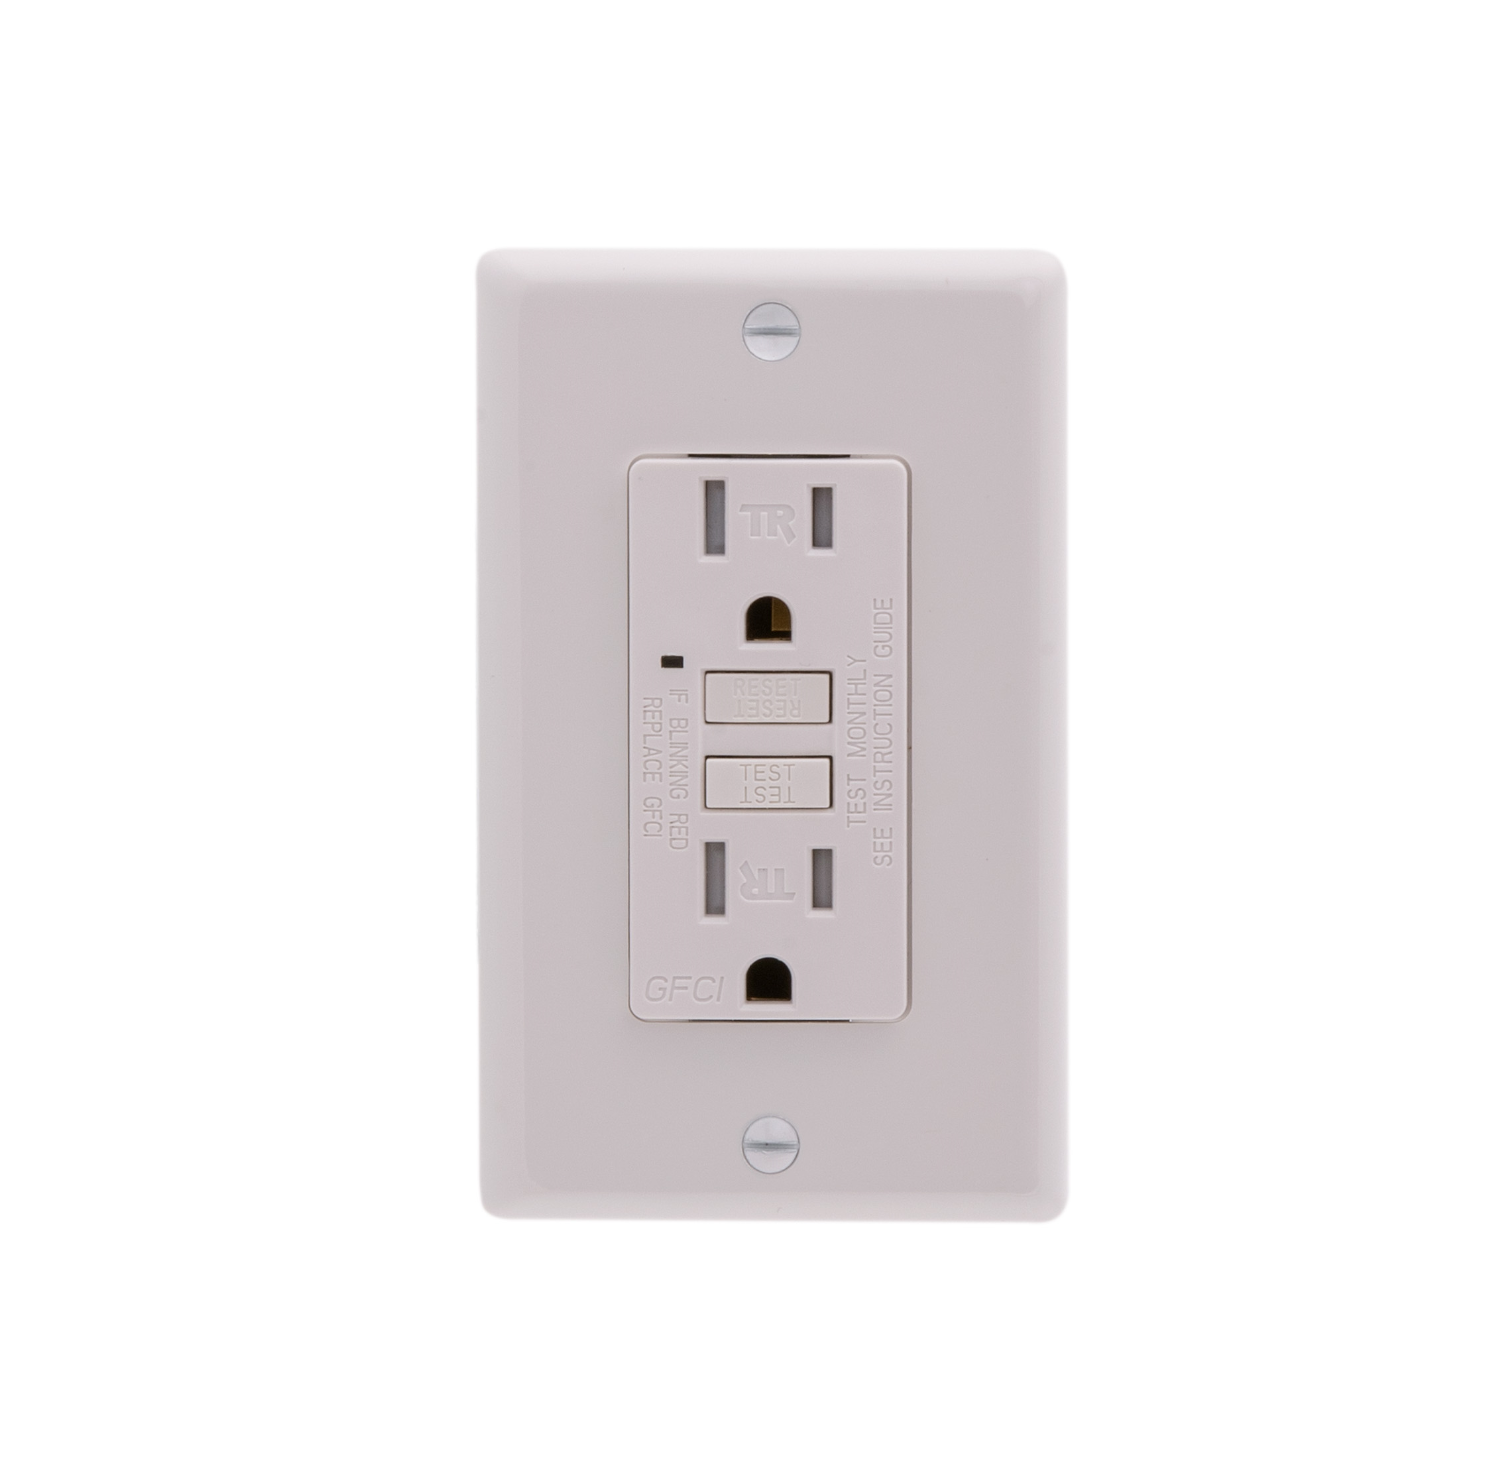 Low price for GFCI Protection - GFCI Outlets GLS-15ATR – Faith Electric